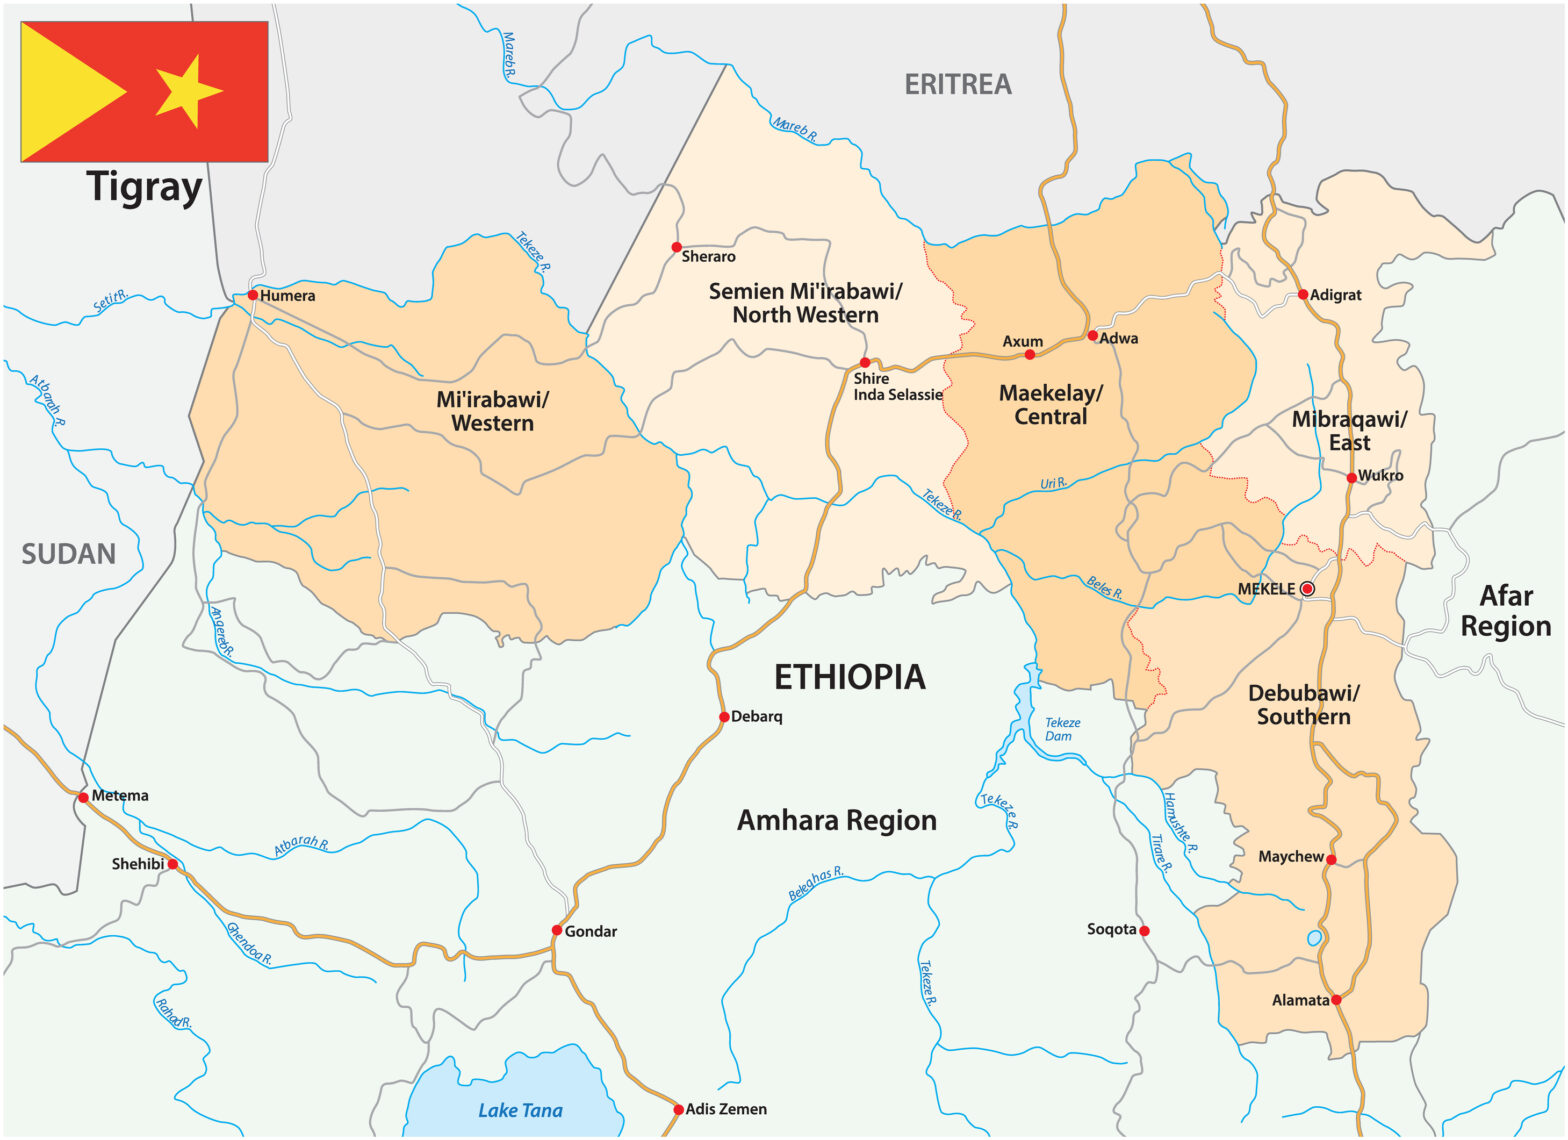 USCRI Advocates for Independent United Nations Inquiry on Missing Tigray Refugees